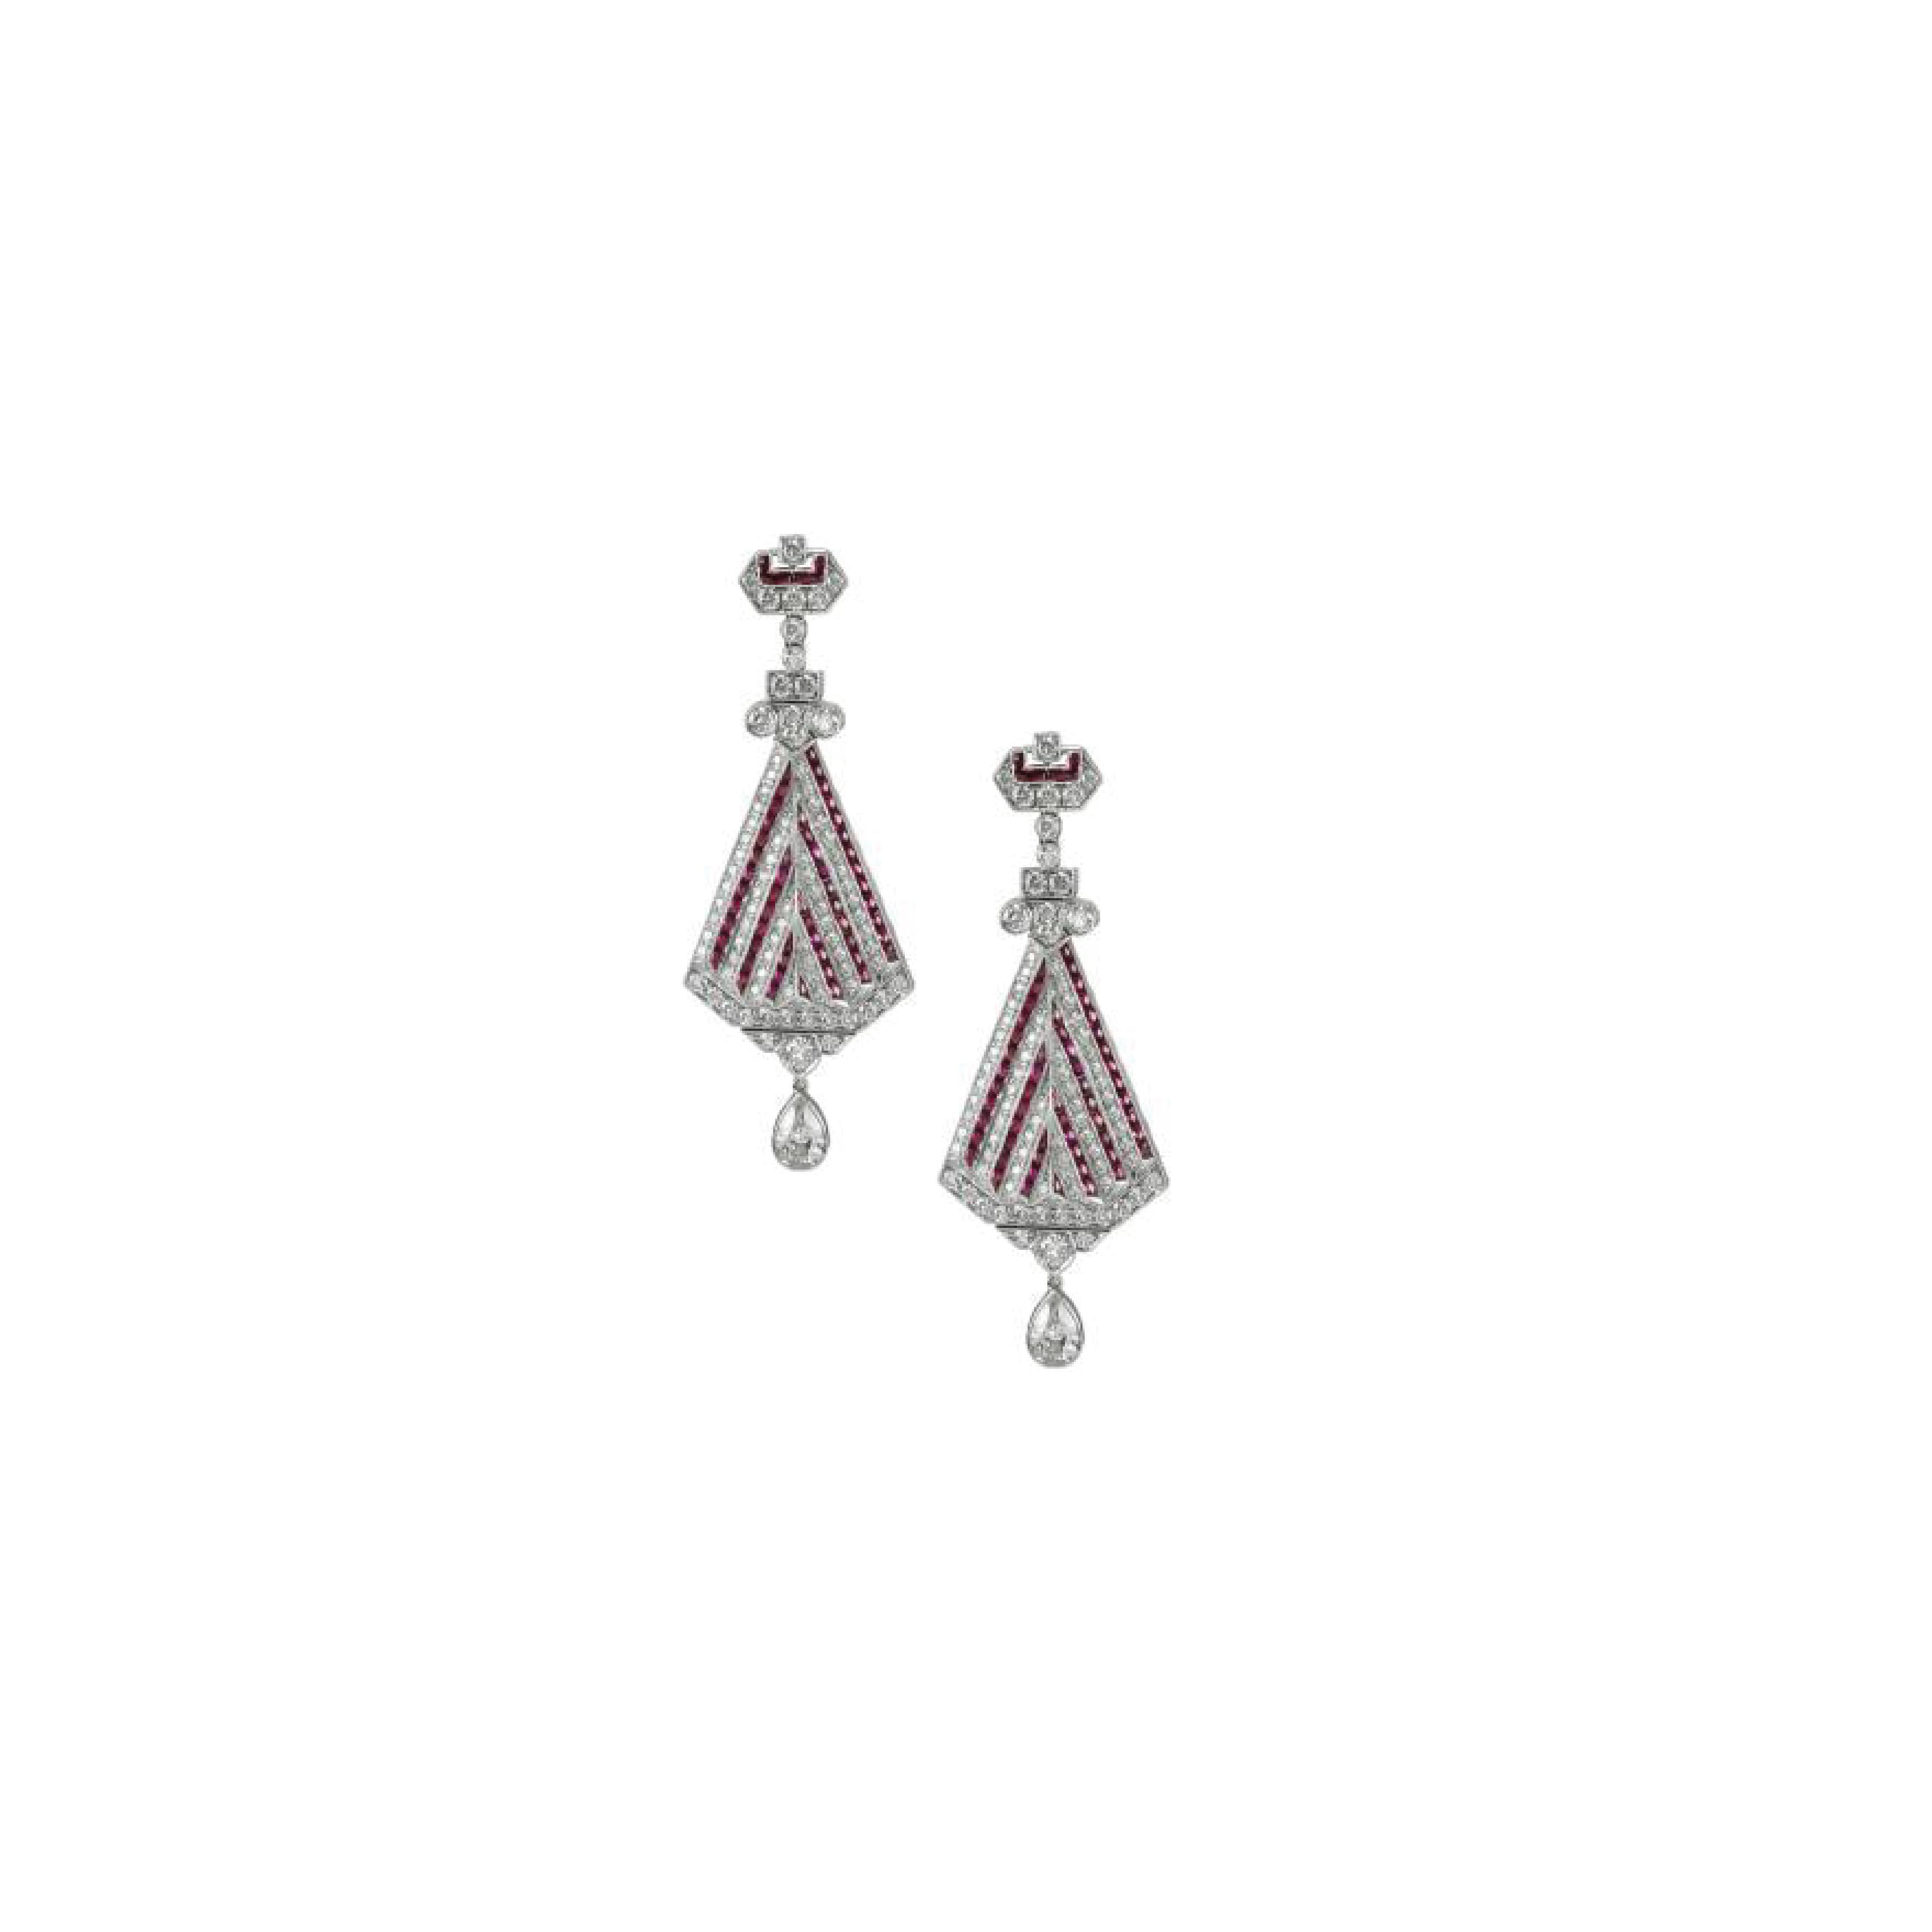 Art Deco inspired earrings set in platinum by Sophia D. that features 2.20 carats of rubies, 2.29 carats of diamonds and 0.97 carats of two round diamonds hanging from the bottom.  

Sophia D by Joseph Dardashti LTD has been known worldwide for 35